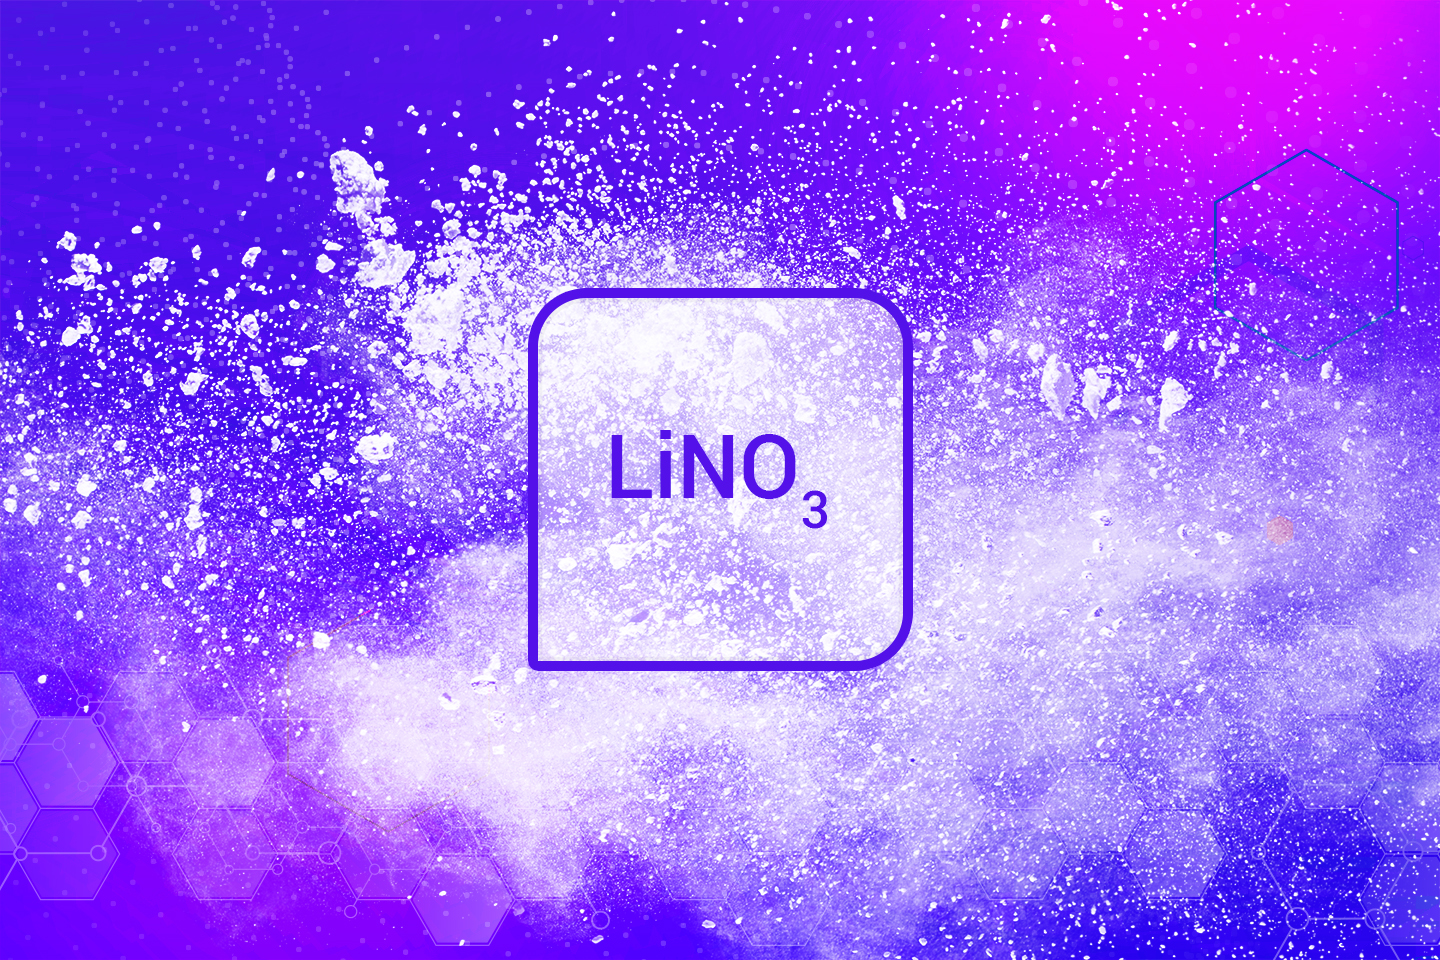 LITHIUM NITRATE